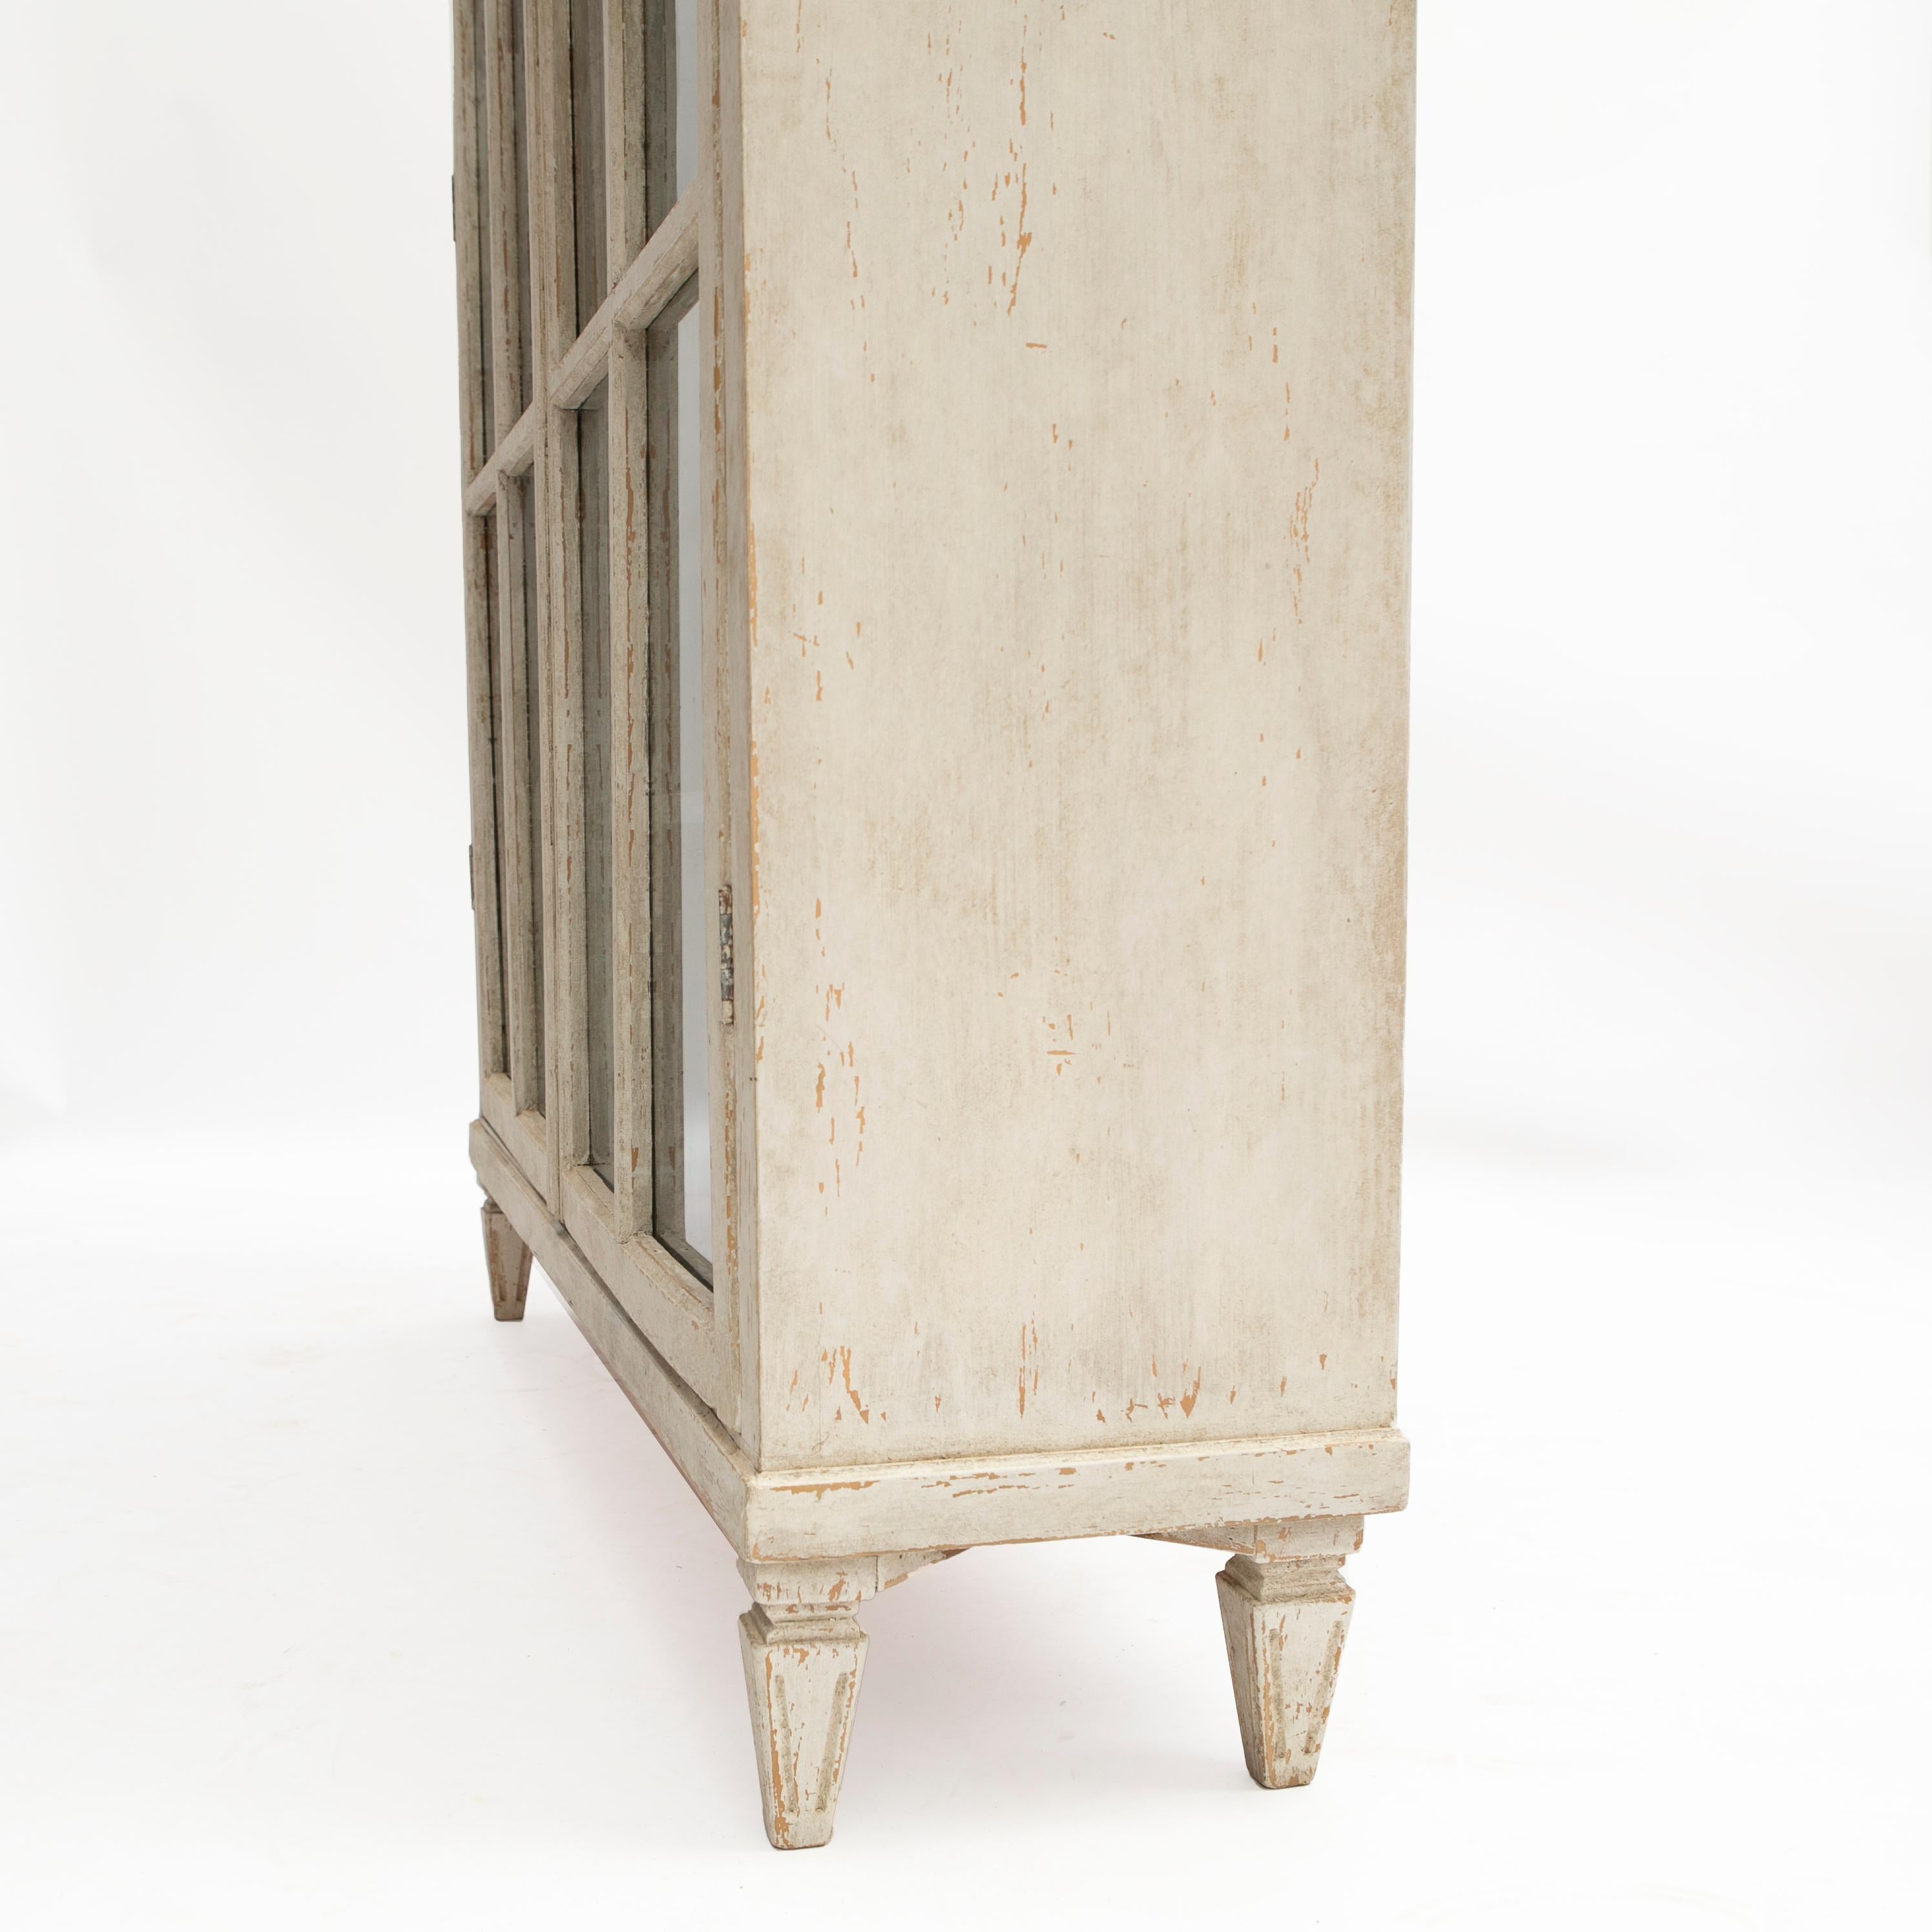 Elegant and large Swedish Gustavian style glazed vitrine or bookcase cabinet.

Professional painted finish in softly distressed Gustavian white, glass panel doors open to reveal a blue painted interior. Cornice featuring carved dentil and rhombuses